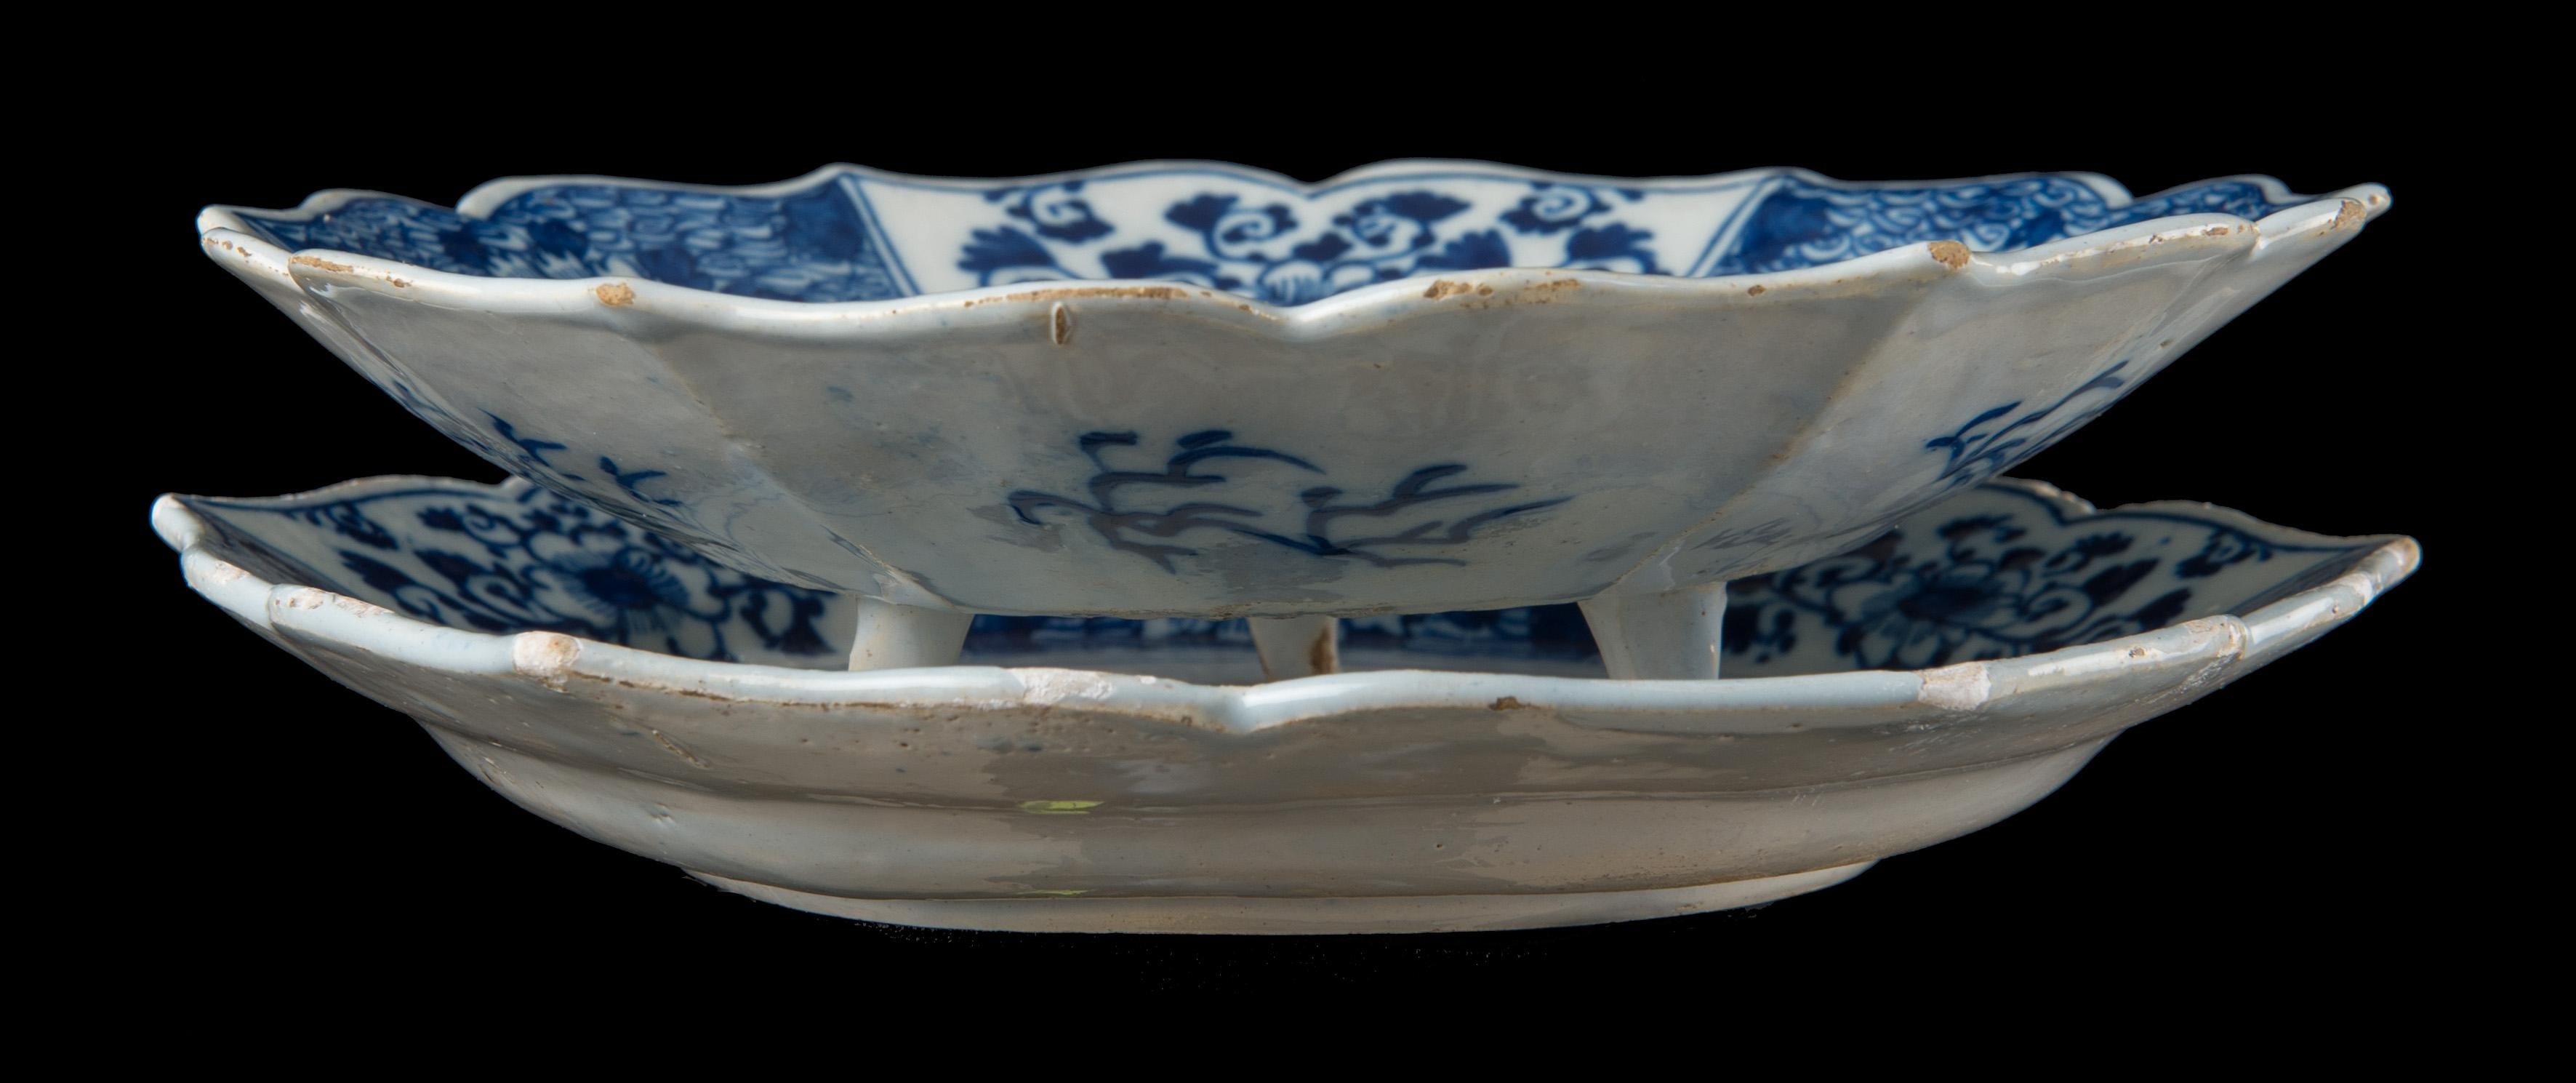 Blue and white fruit dish on stand.
Delft, 1740-1760 The Porcelain Claw pottery mark: a claw and number 70.
The hexagonal fruit dish and stand have scalloped accolade-shaped rims. The dish stands on three feet and is pierced with a star in a